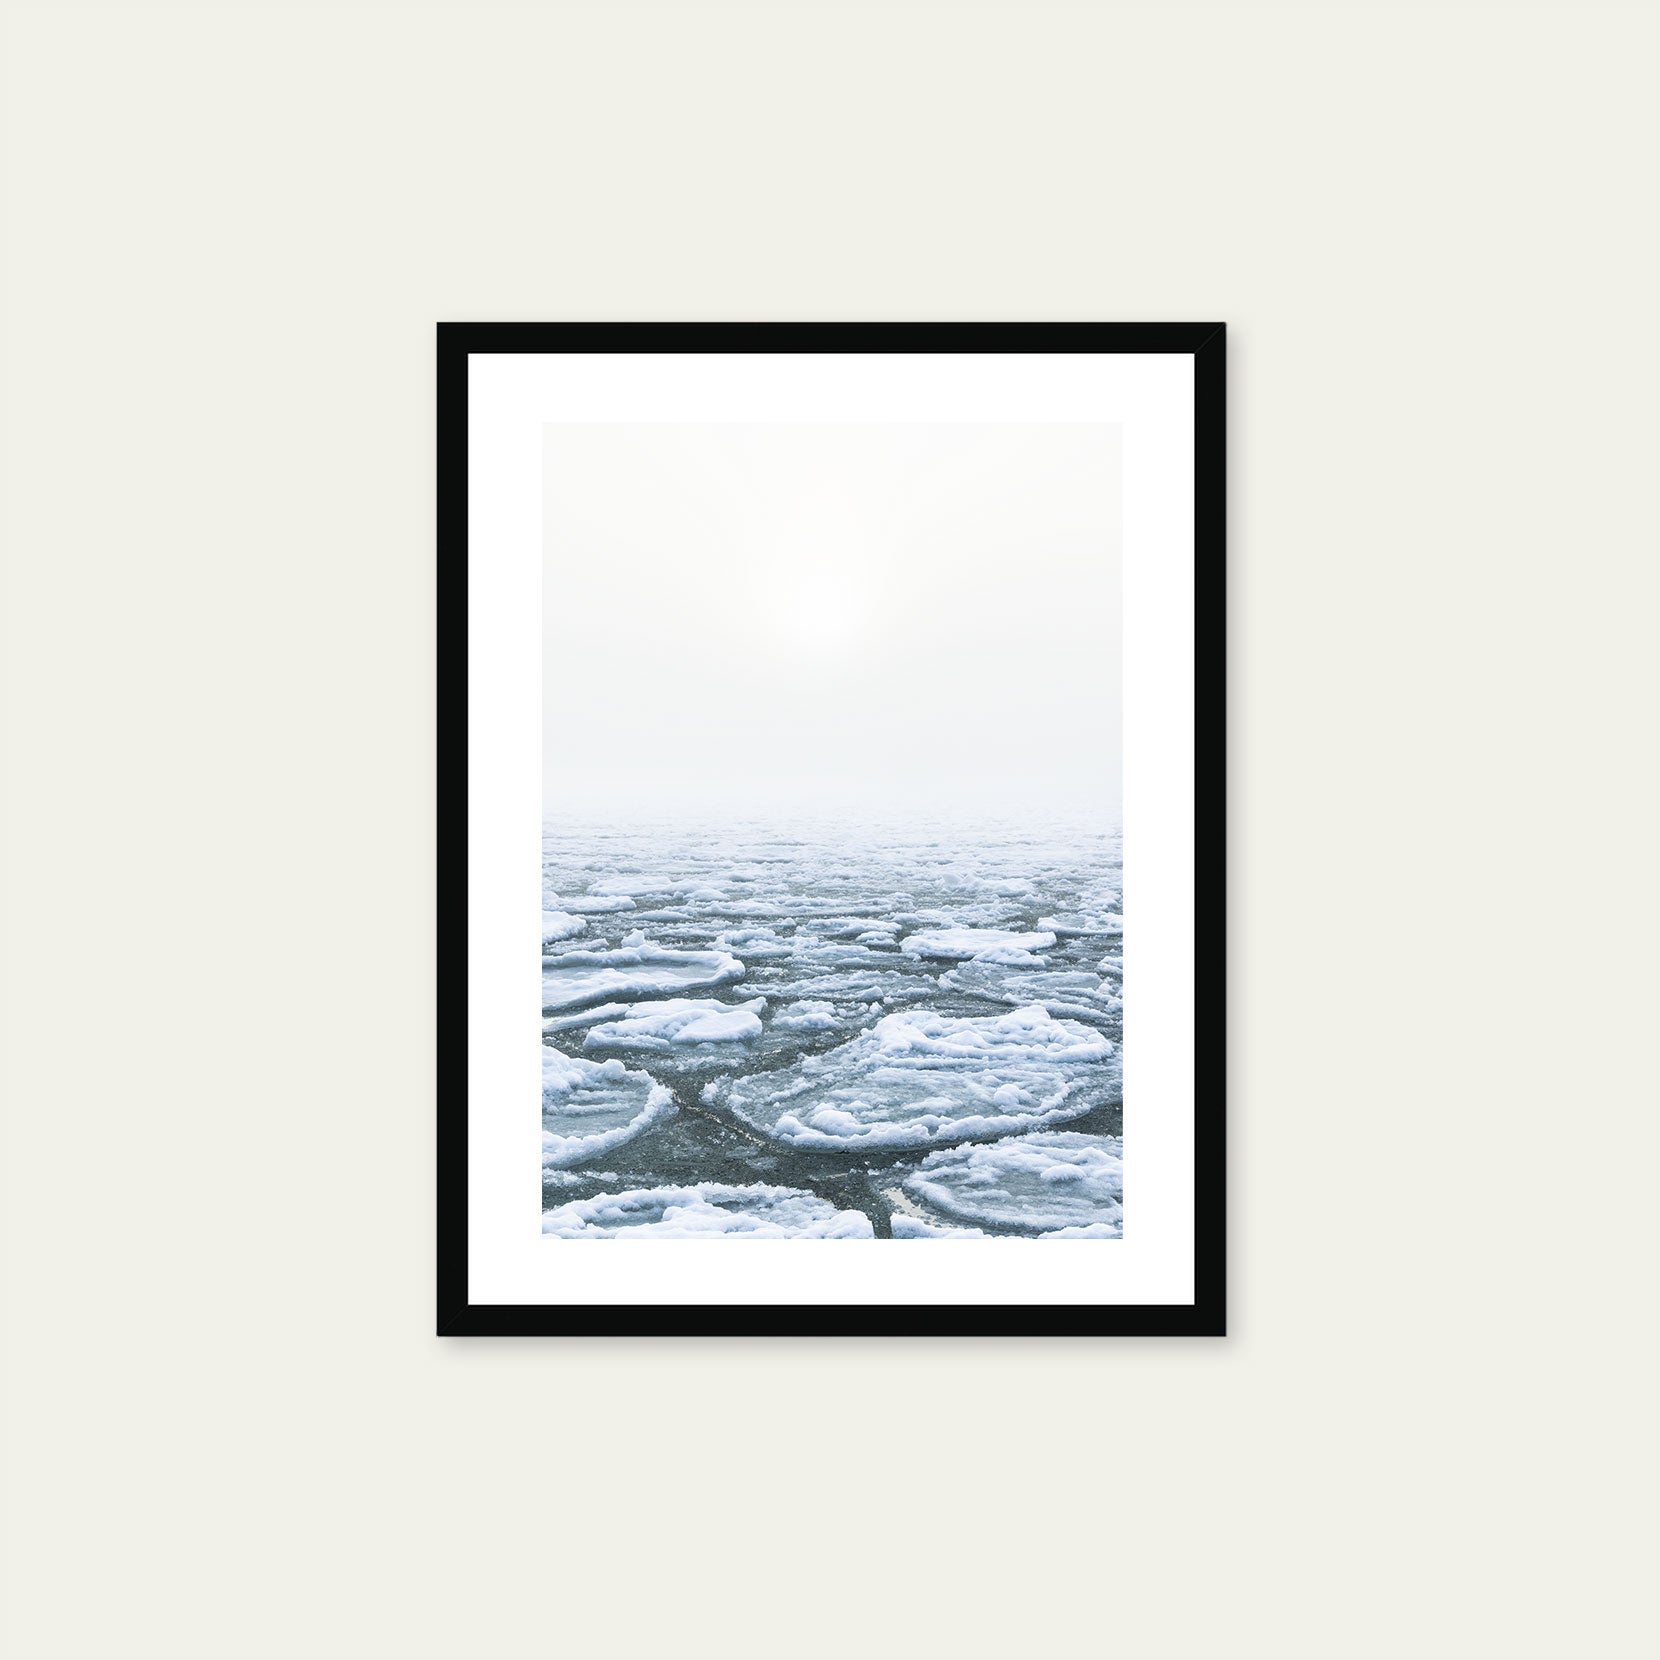 A black framed print of ice pans on foggy winter day